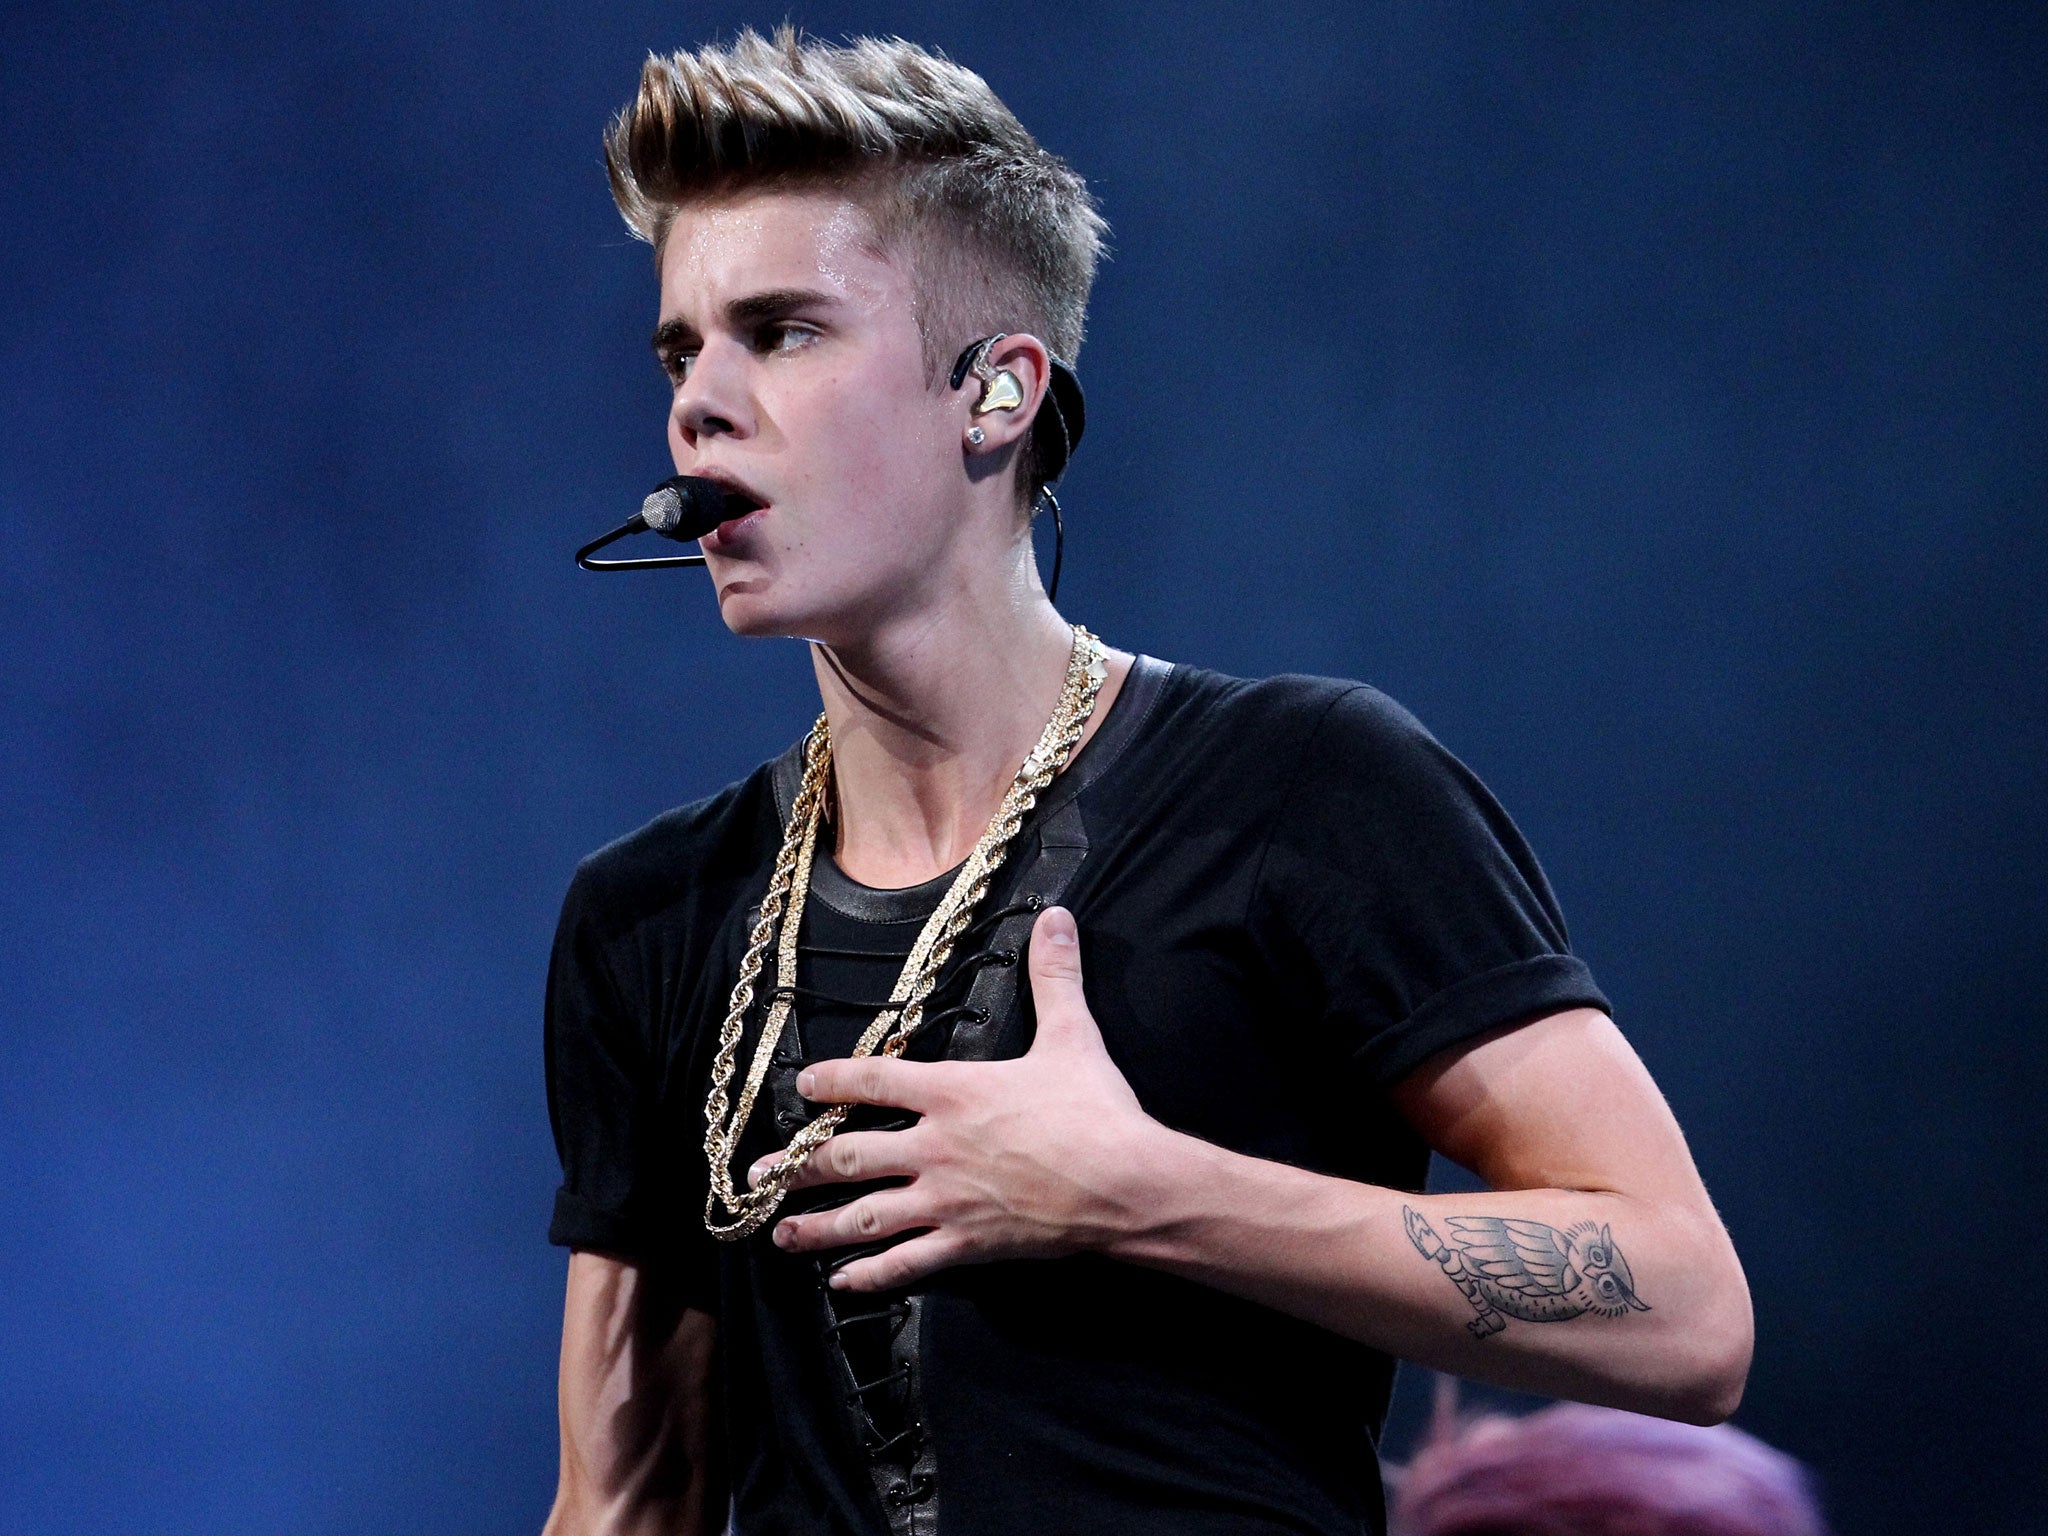 Justin Bieber shows off one of his tattoos onstage during KIIS FM's 2012 Jingle Ball at Nokia Theatre L.A. Live on December 3, 2012 in Los Angeles, California.